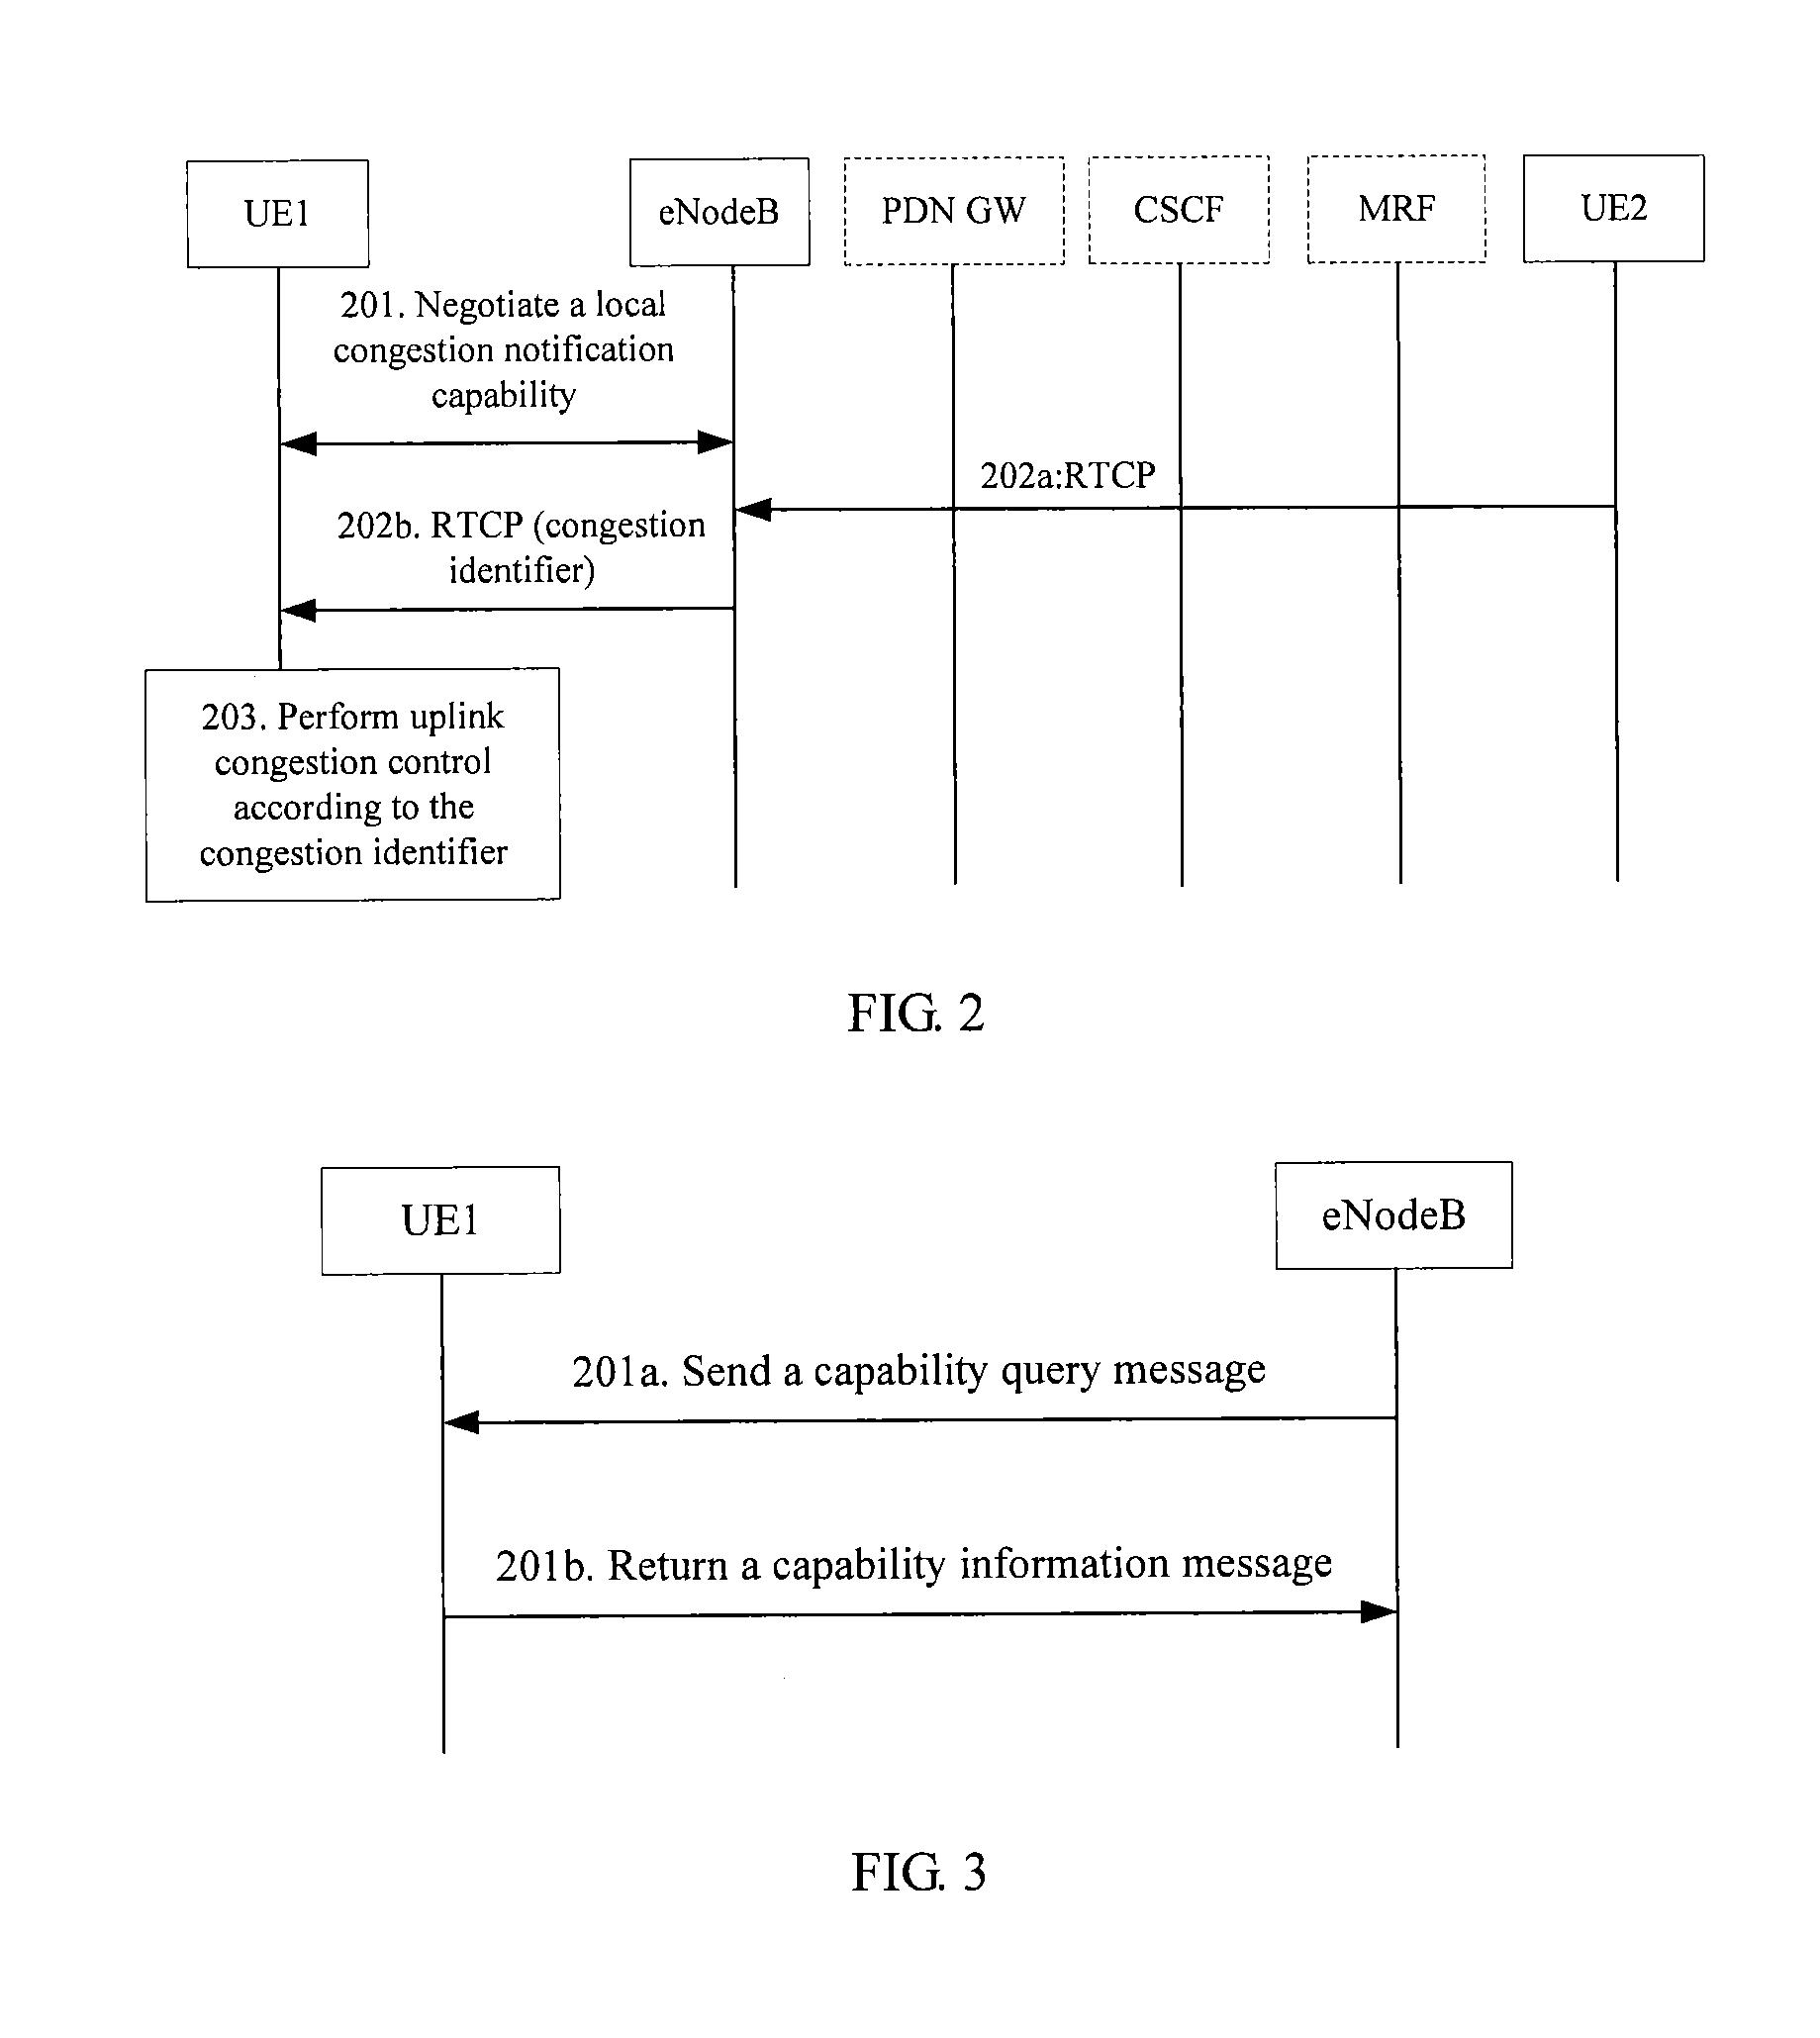 Method for handling local link congestion and apparatus